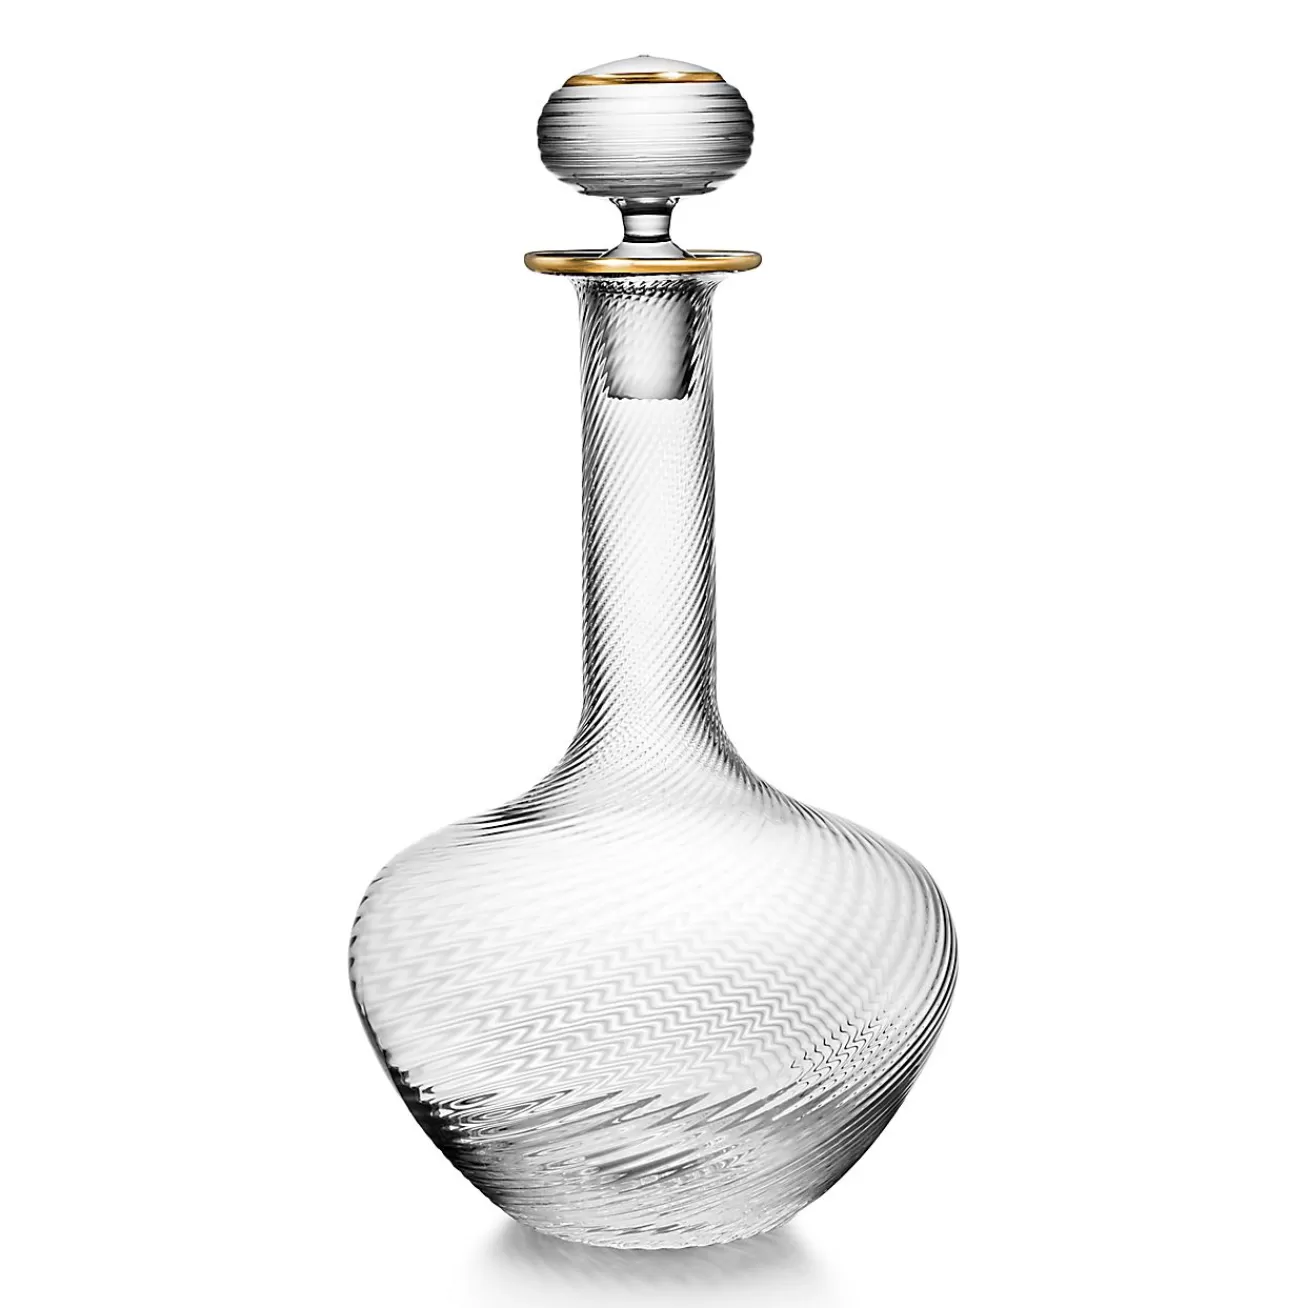 Tiffany & Co. Tiffany Twist Decanter in Glass | ^ The Home | Housewarming Gifts